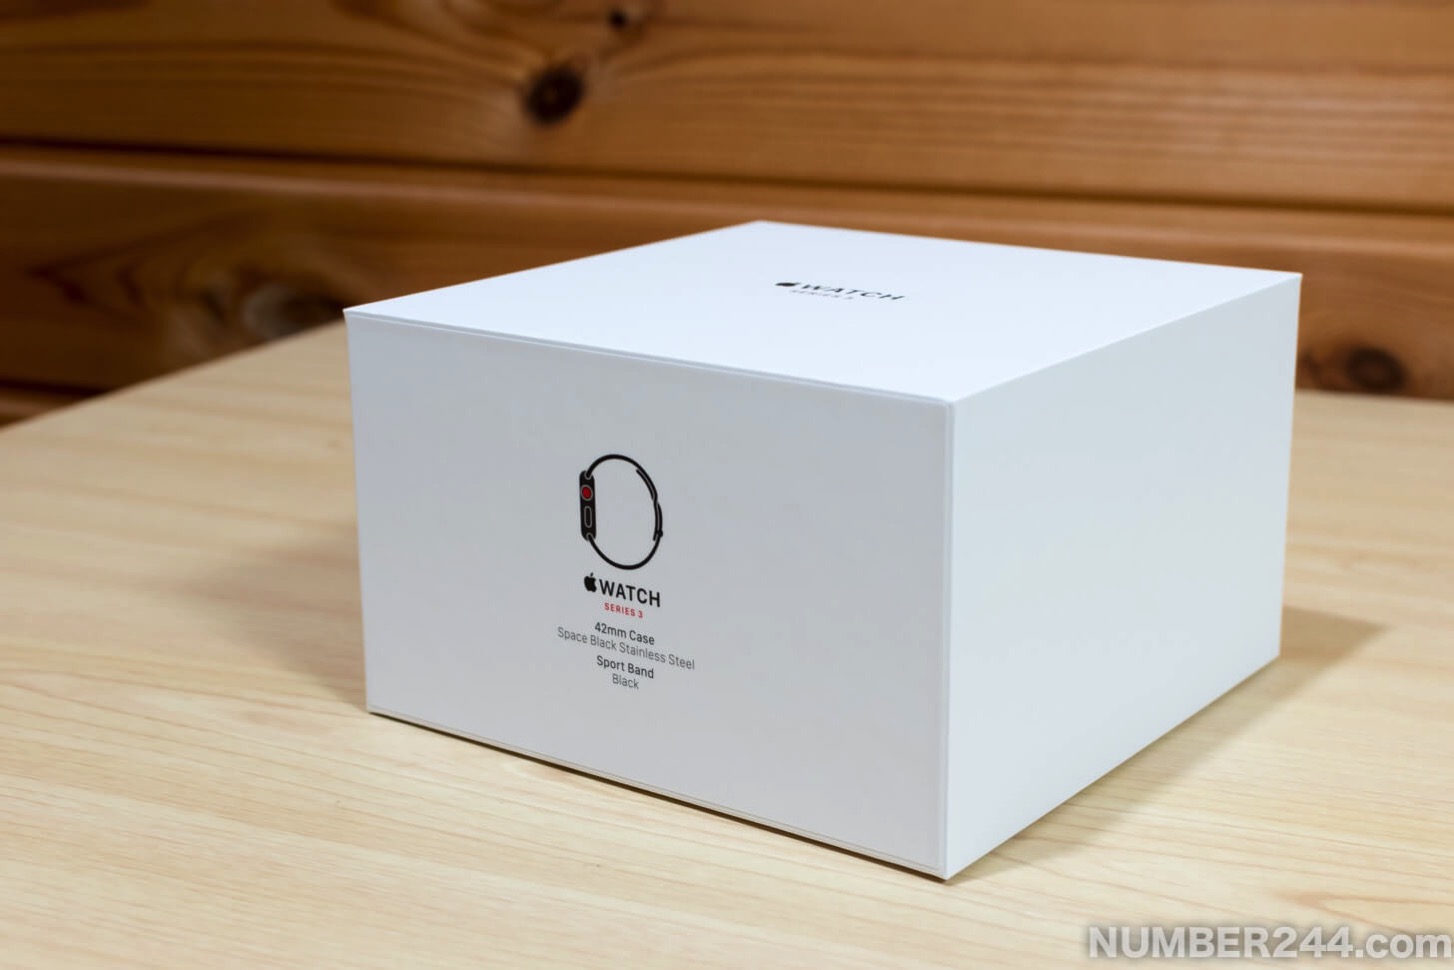 Apple Watch Series 3 unboxing7